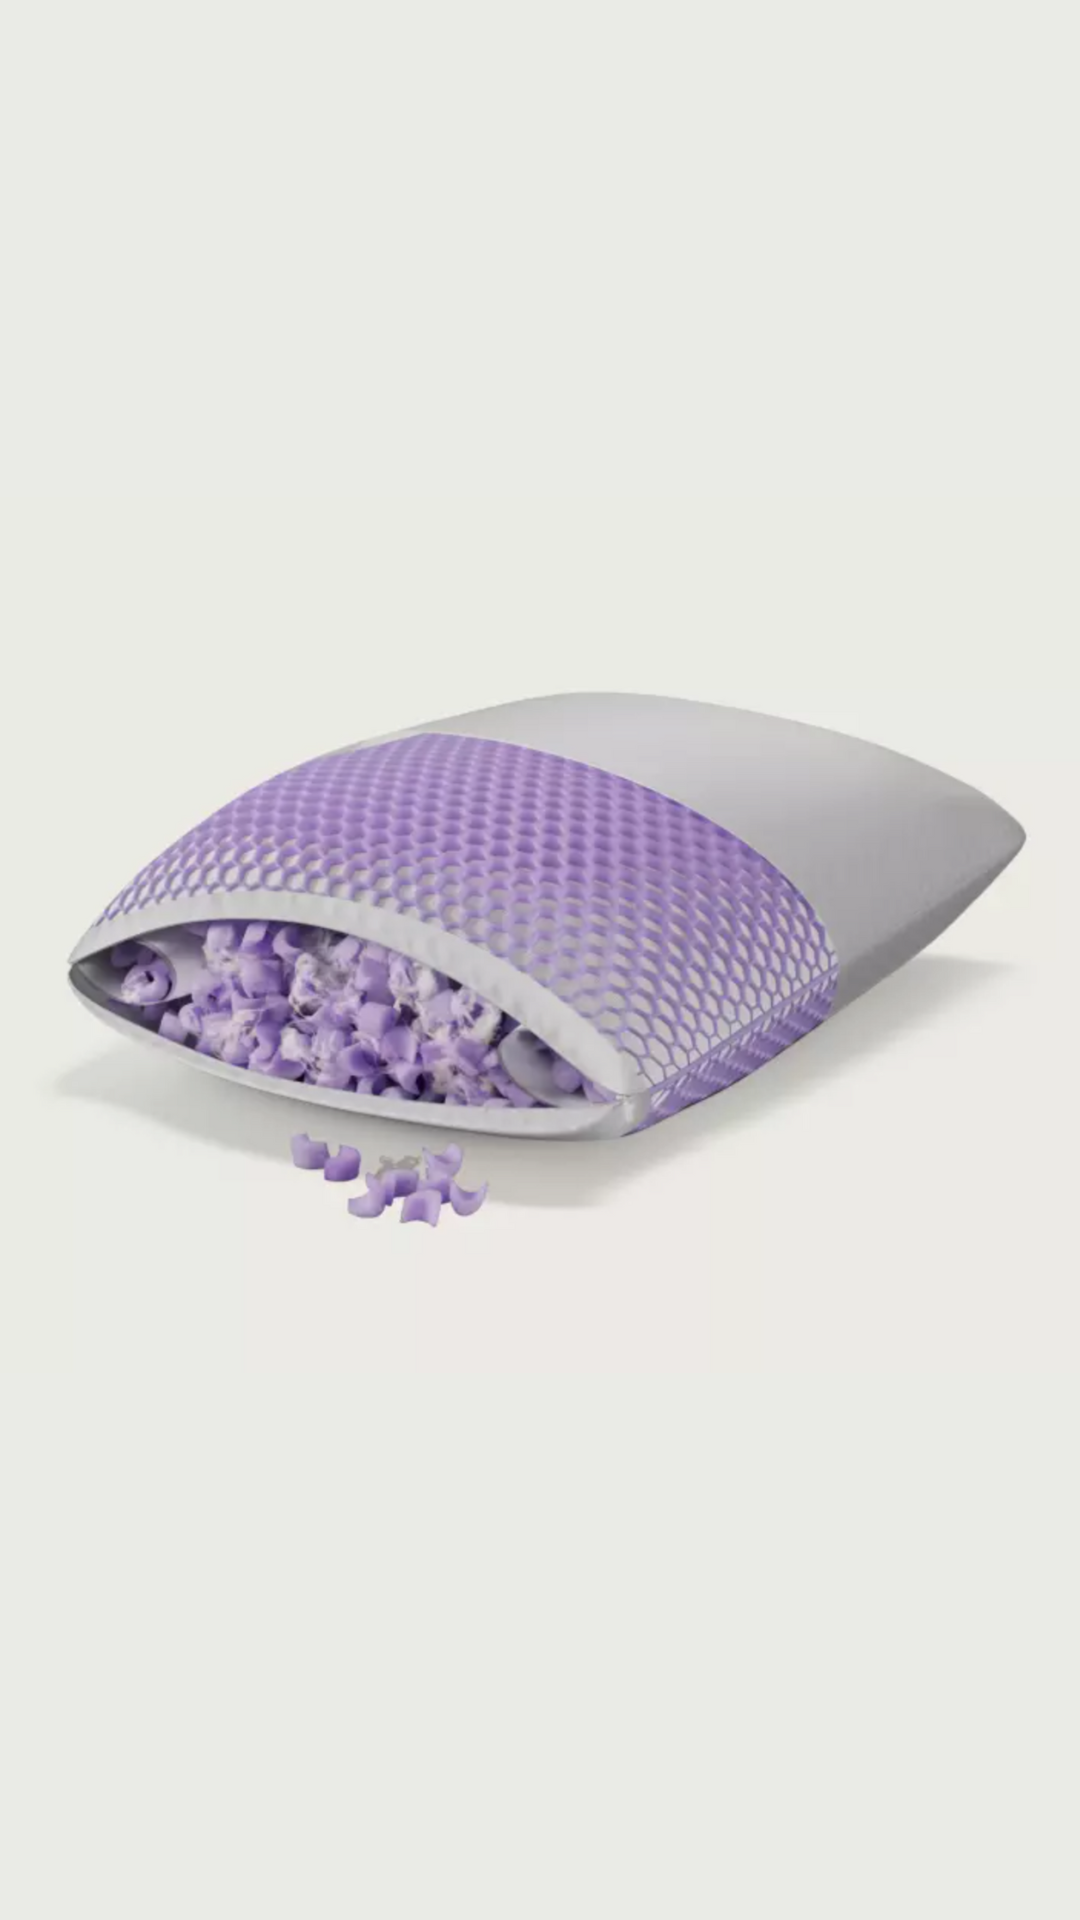 <p><strong>$179.00</strong></p><p><a href="https://go.redirectingat.com?id=74968X1553576&url=https%3A%2F%2Fpurple.com%2Fpillows%2Ffree-form&sref=https%3A%2F%2Fwww.prevention.com%2Fhealth%2Fg61155023%2Fbest-pillow-neck-pain%2F">Shop Now</a></p><p>I’ve used and enjoyed Purple in the past, but I specifically tested the Freeform pillow for this test since it has neck roll chambers and adjustable capabilities. </p><p>Right away, I noticed two things: the <strong>immediate cooling effect and high elevation</strong>. While I wasn’t a fan of the height at first, I took advantage of the adjustable features and removed some foam to bring it lower. I felt much more comfortable when I got the pillow one to two inches lower.</p><p>Unique features like their Honeycomb GelFlex Grid and foam material offer moisture-wicking properties and a bouncy yet relieving feel. Because of the steeper height, this pillow is most ideal for a side sleeper. </p><p><strong>What a reviewer says: </strong>“This pillow has been a life changer. I suffered from terrible neck pain from my cheap pillow I’ve used for over a year, which I never really liked to begin with. This pillow has given me the best sleep of my life.” </p>